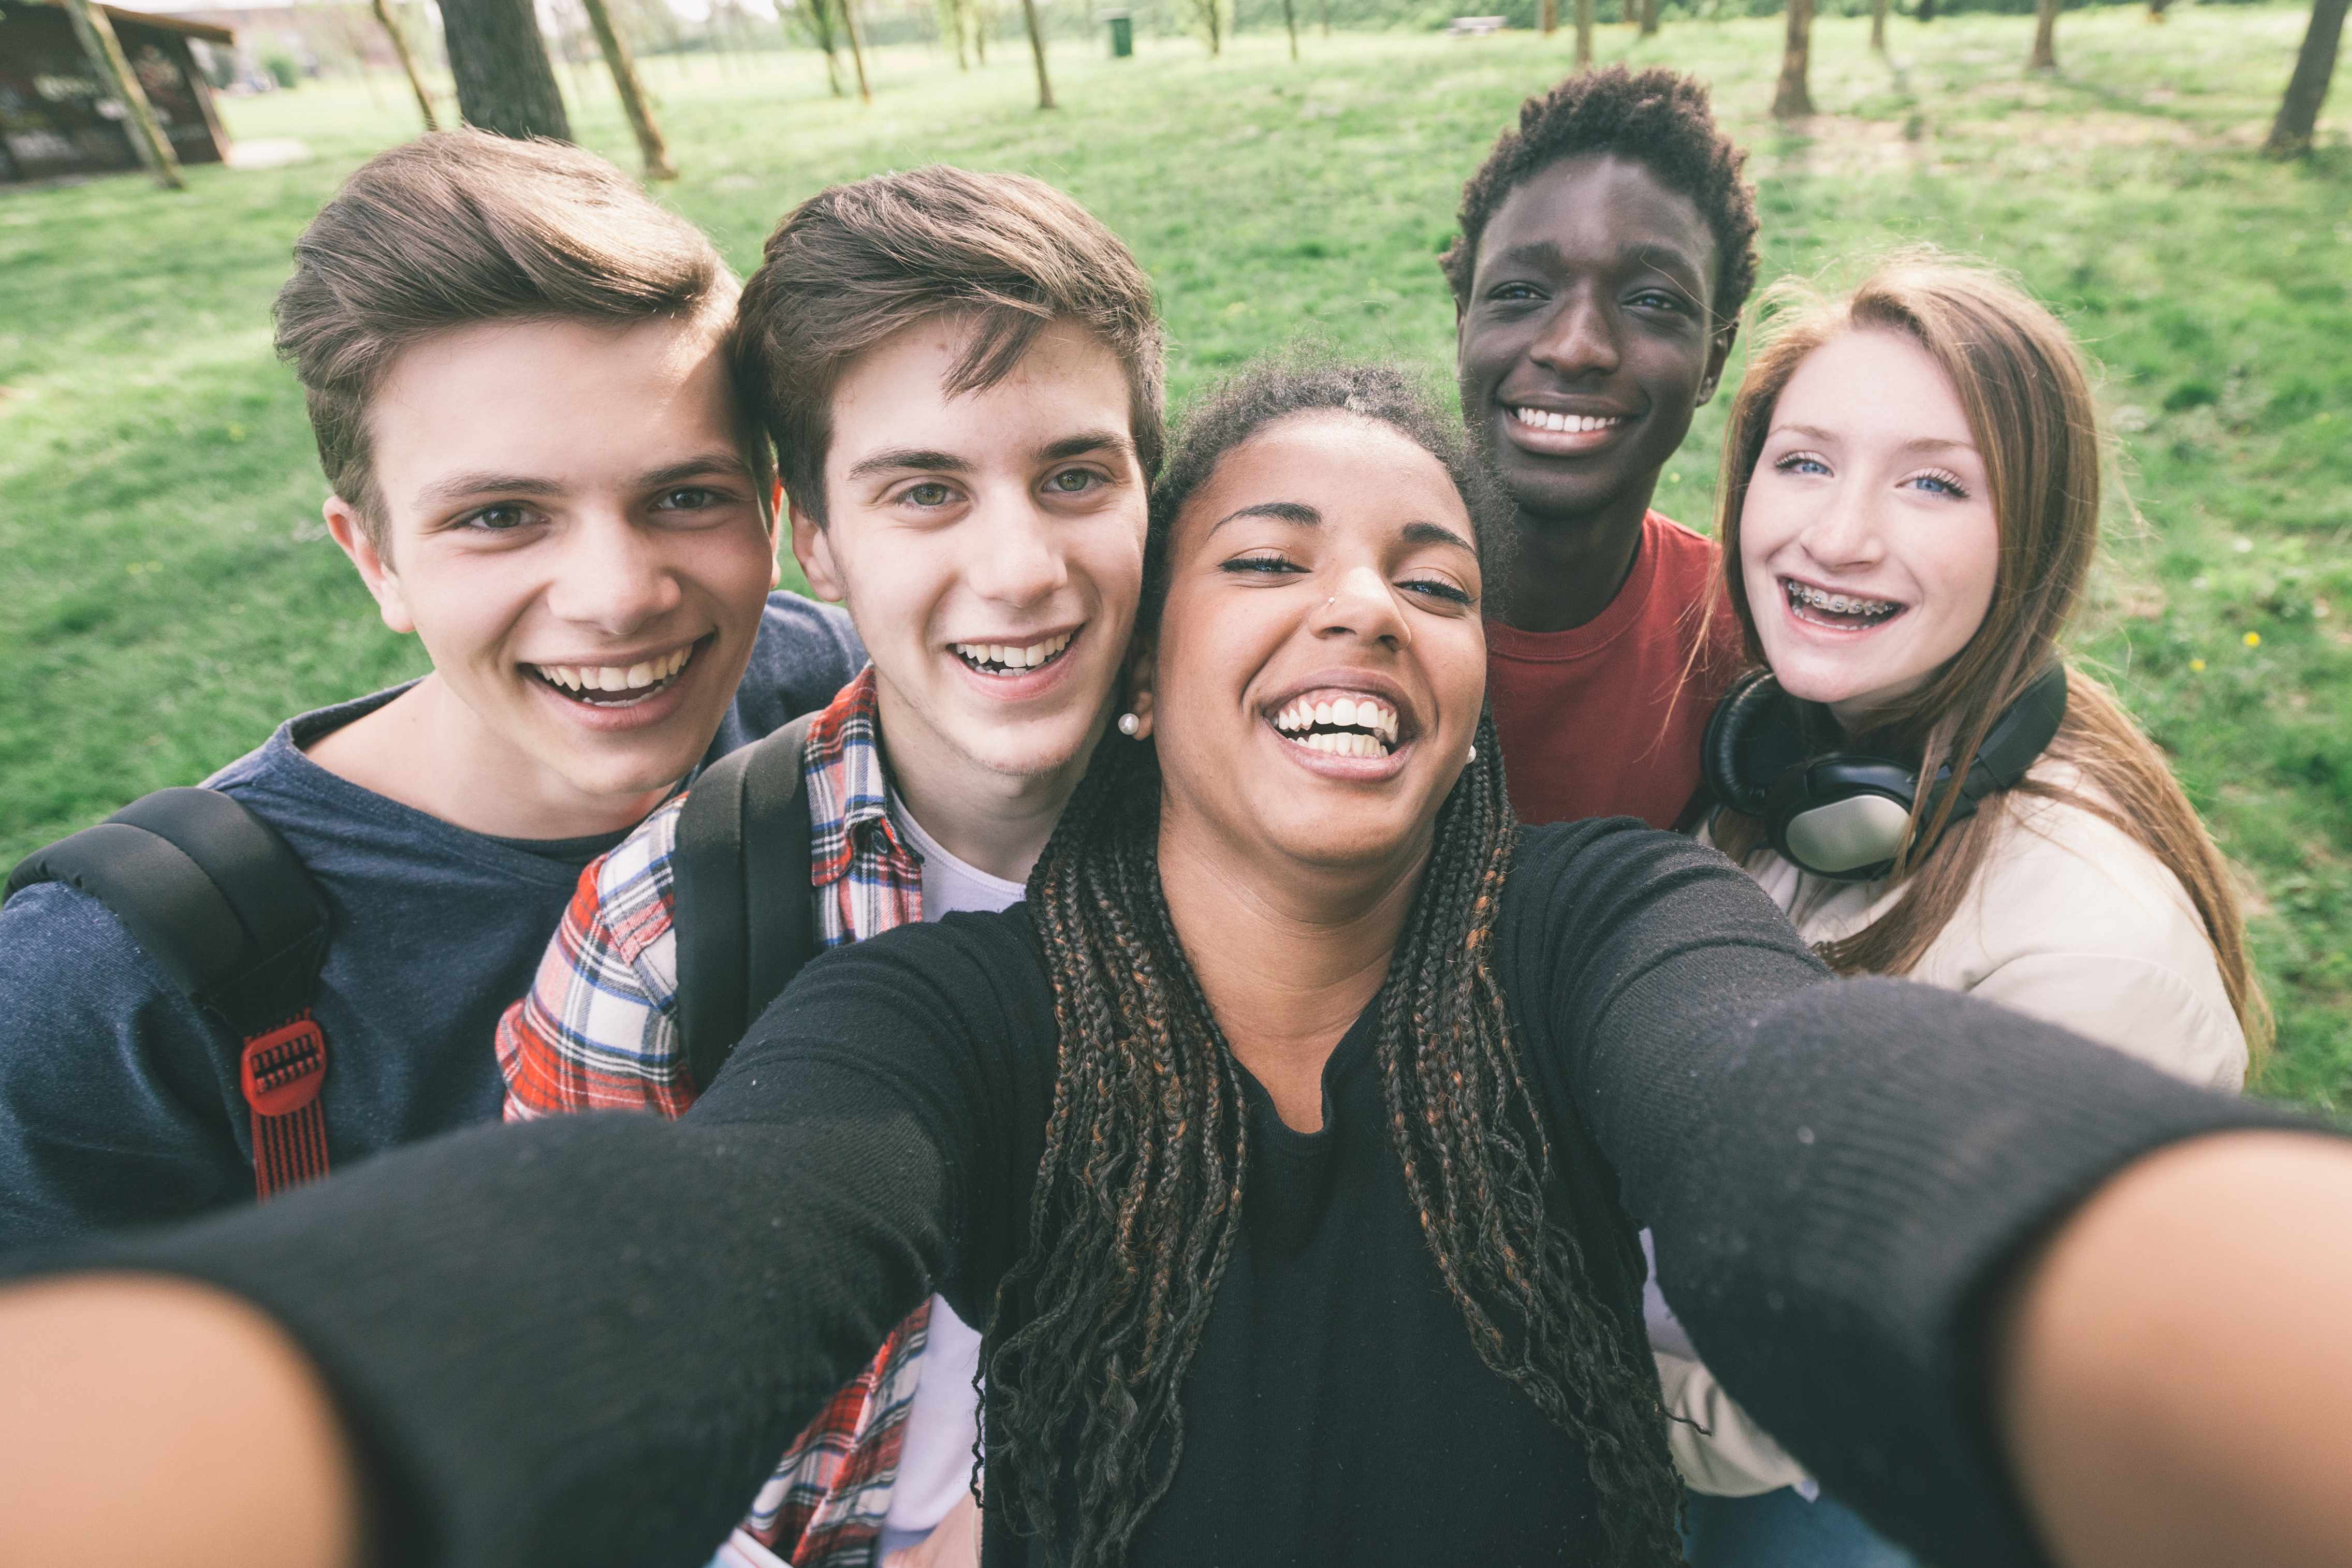 young people taking a selfie picture, laughing and smiling